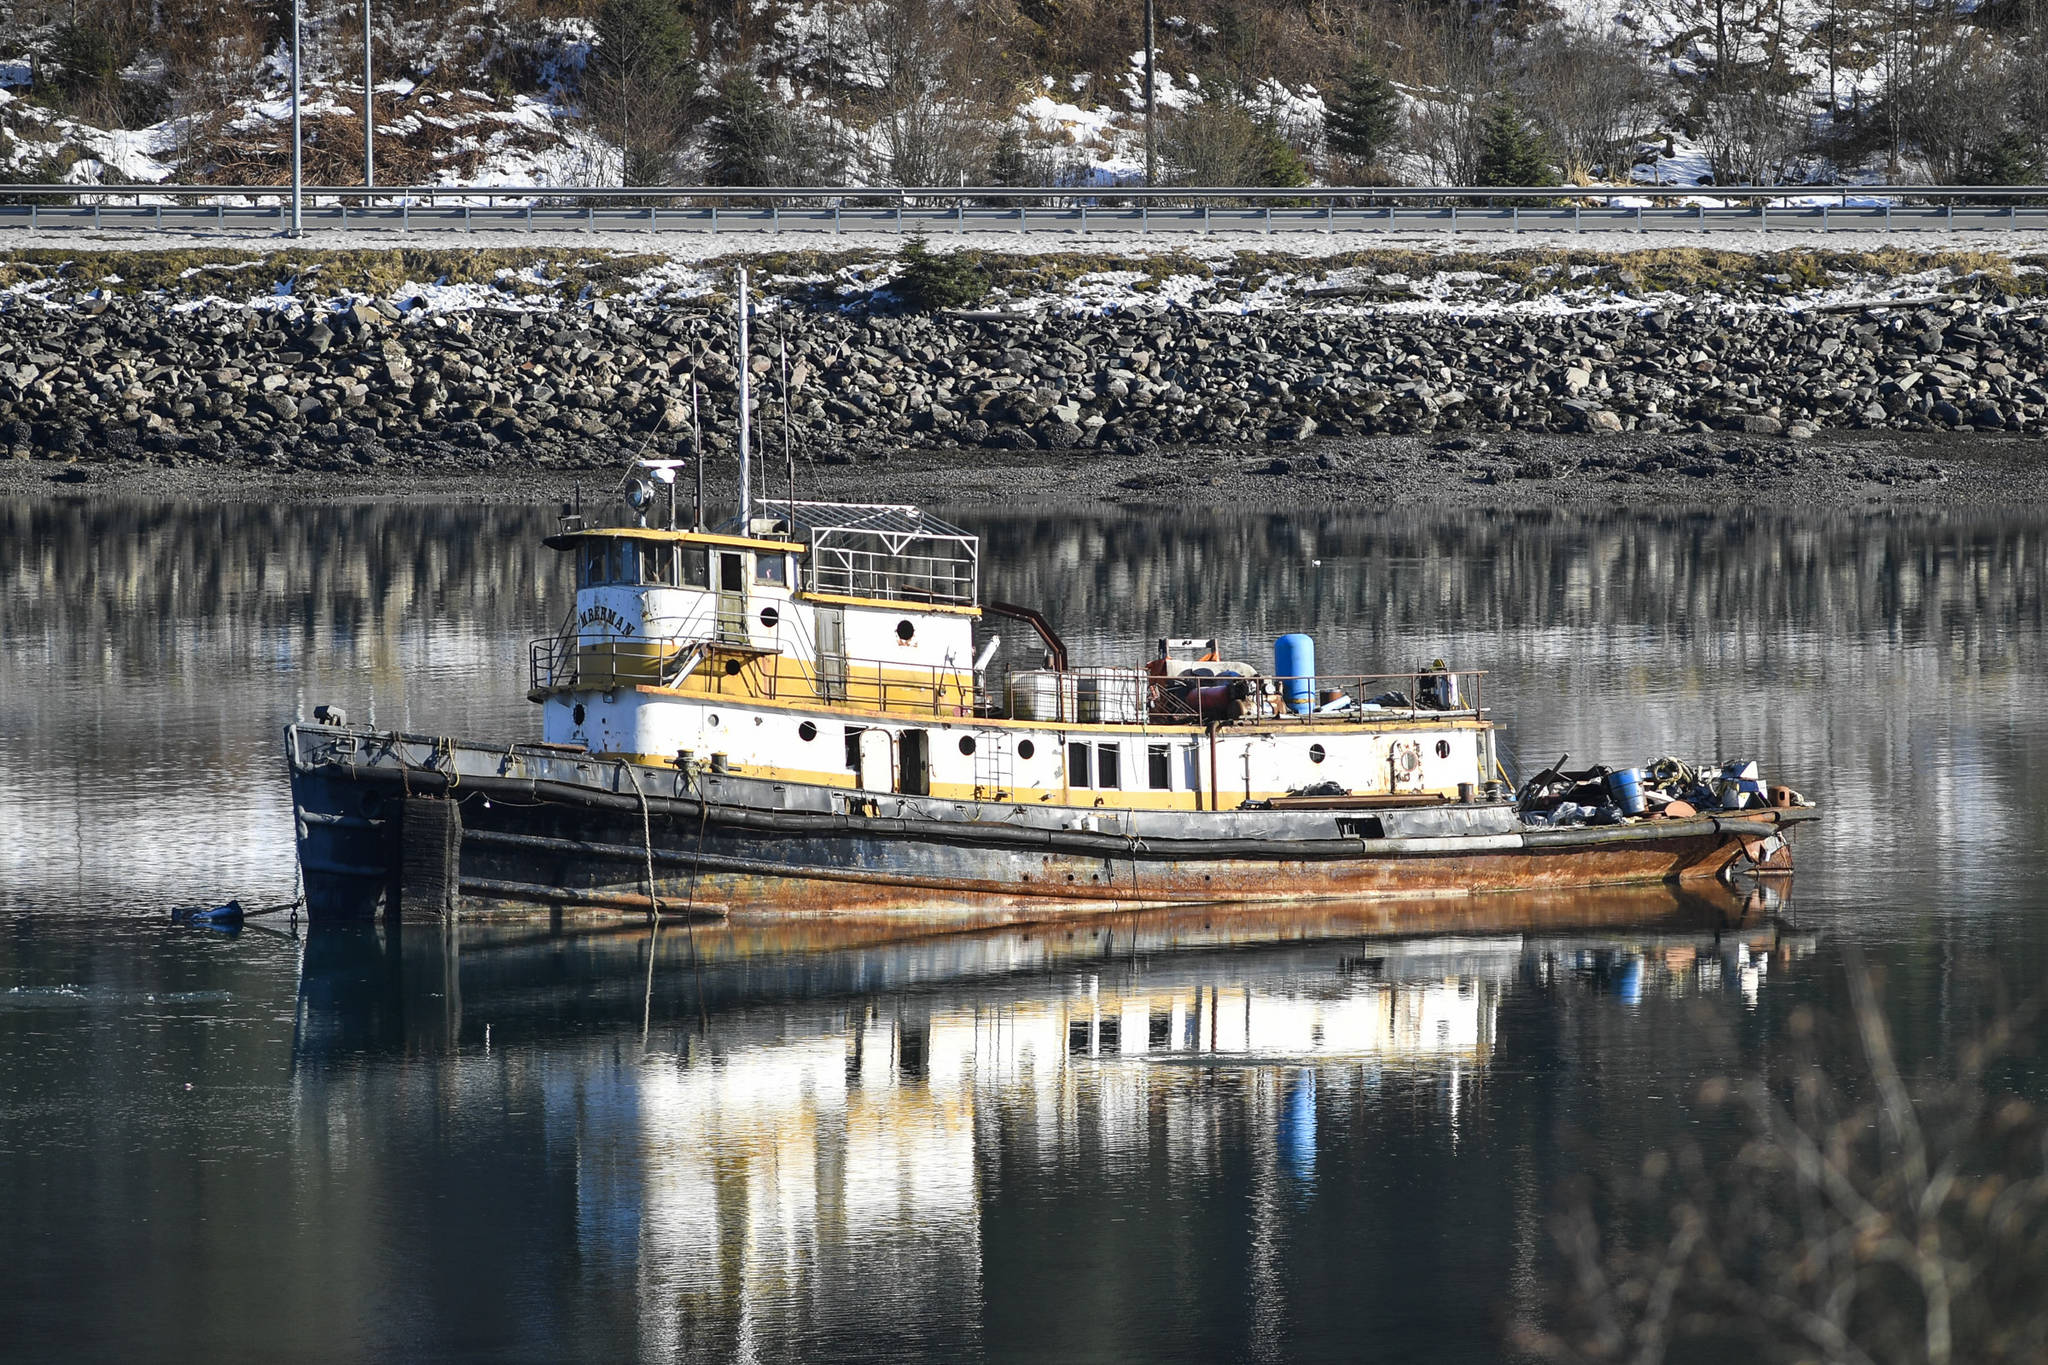 The derelict tug, the Lumberman, at anchor in Gastineau Channel on Tuesday, Feb. 26, 2019. (Michael Penn | Juneau Empire)